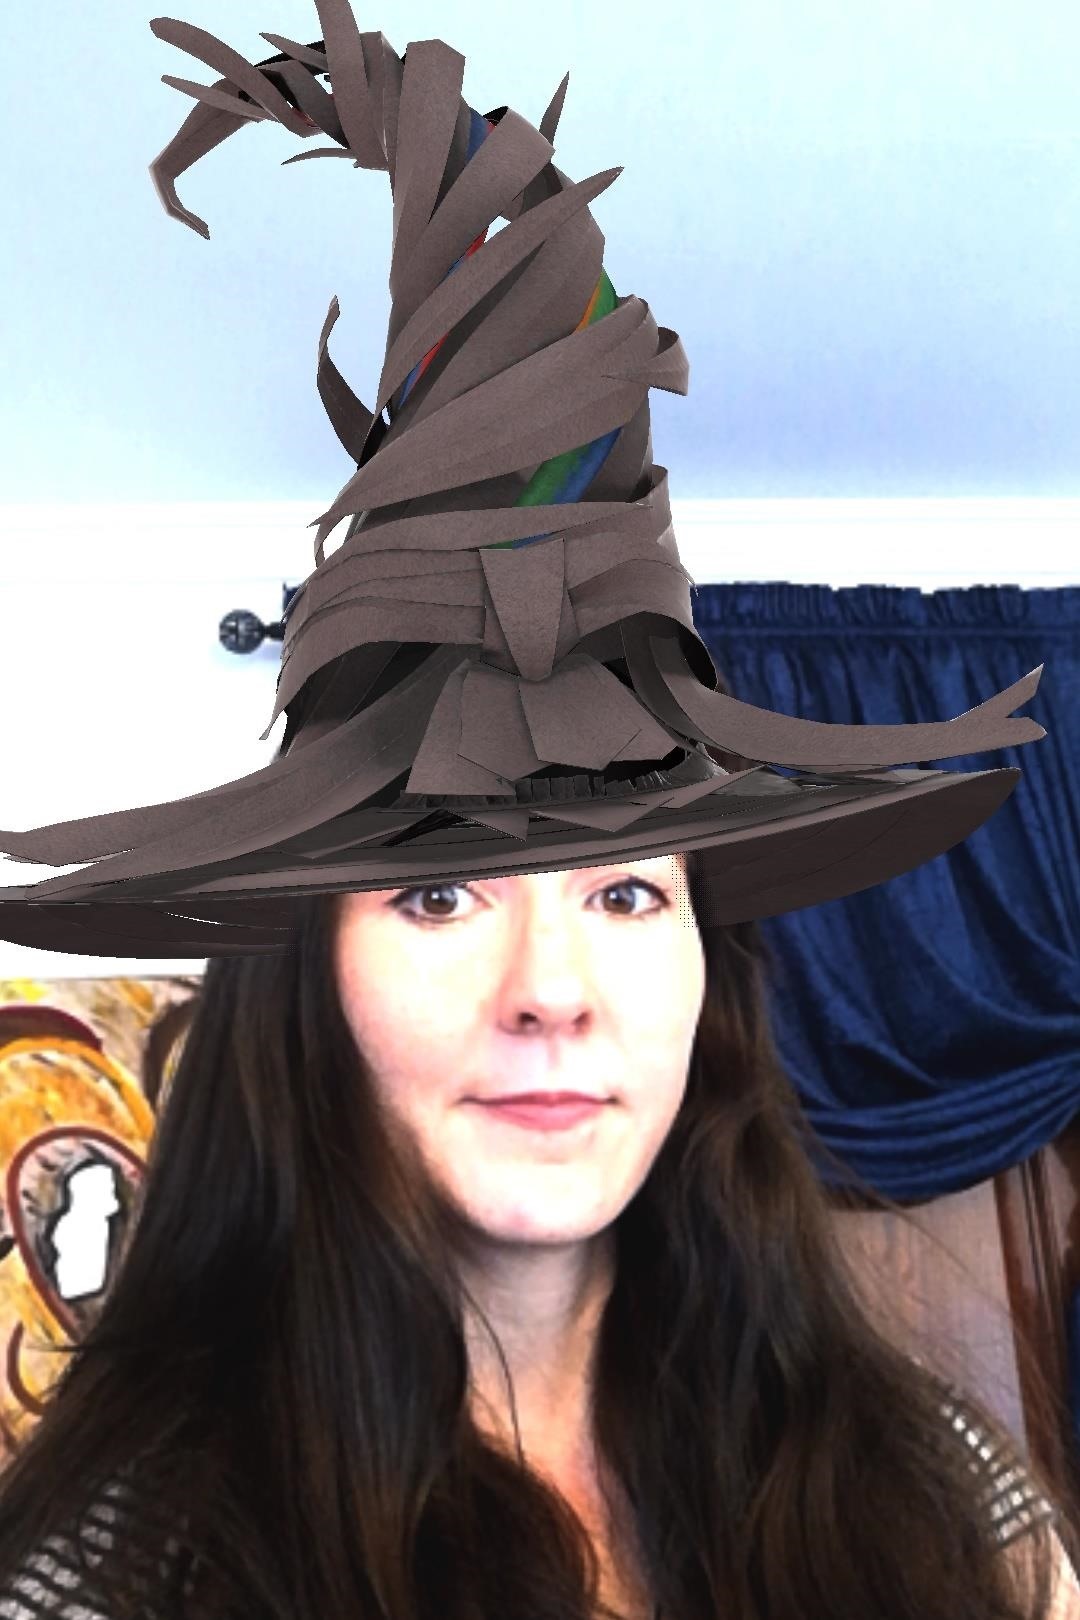 Harry Potter Fans Can Now Summon a Wizarding World Sorting Hat in Augmented Reality